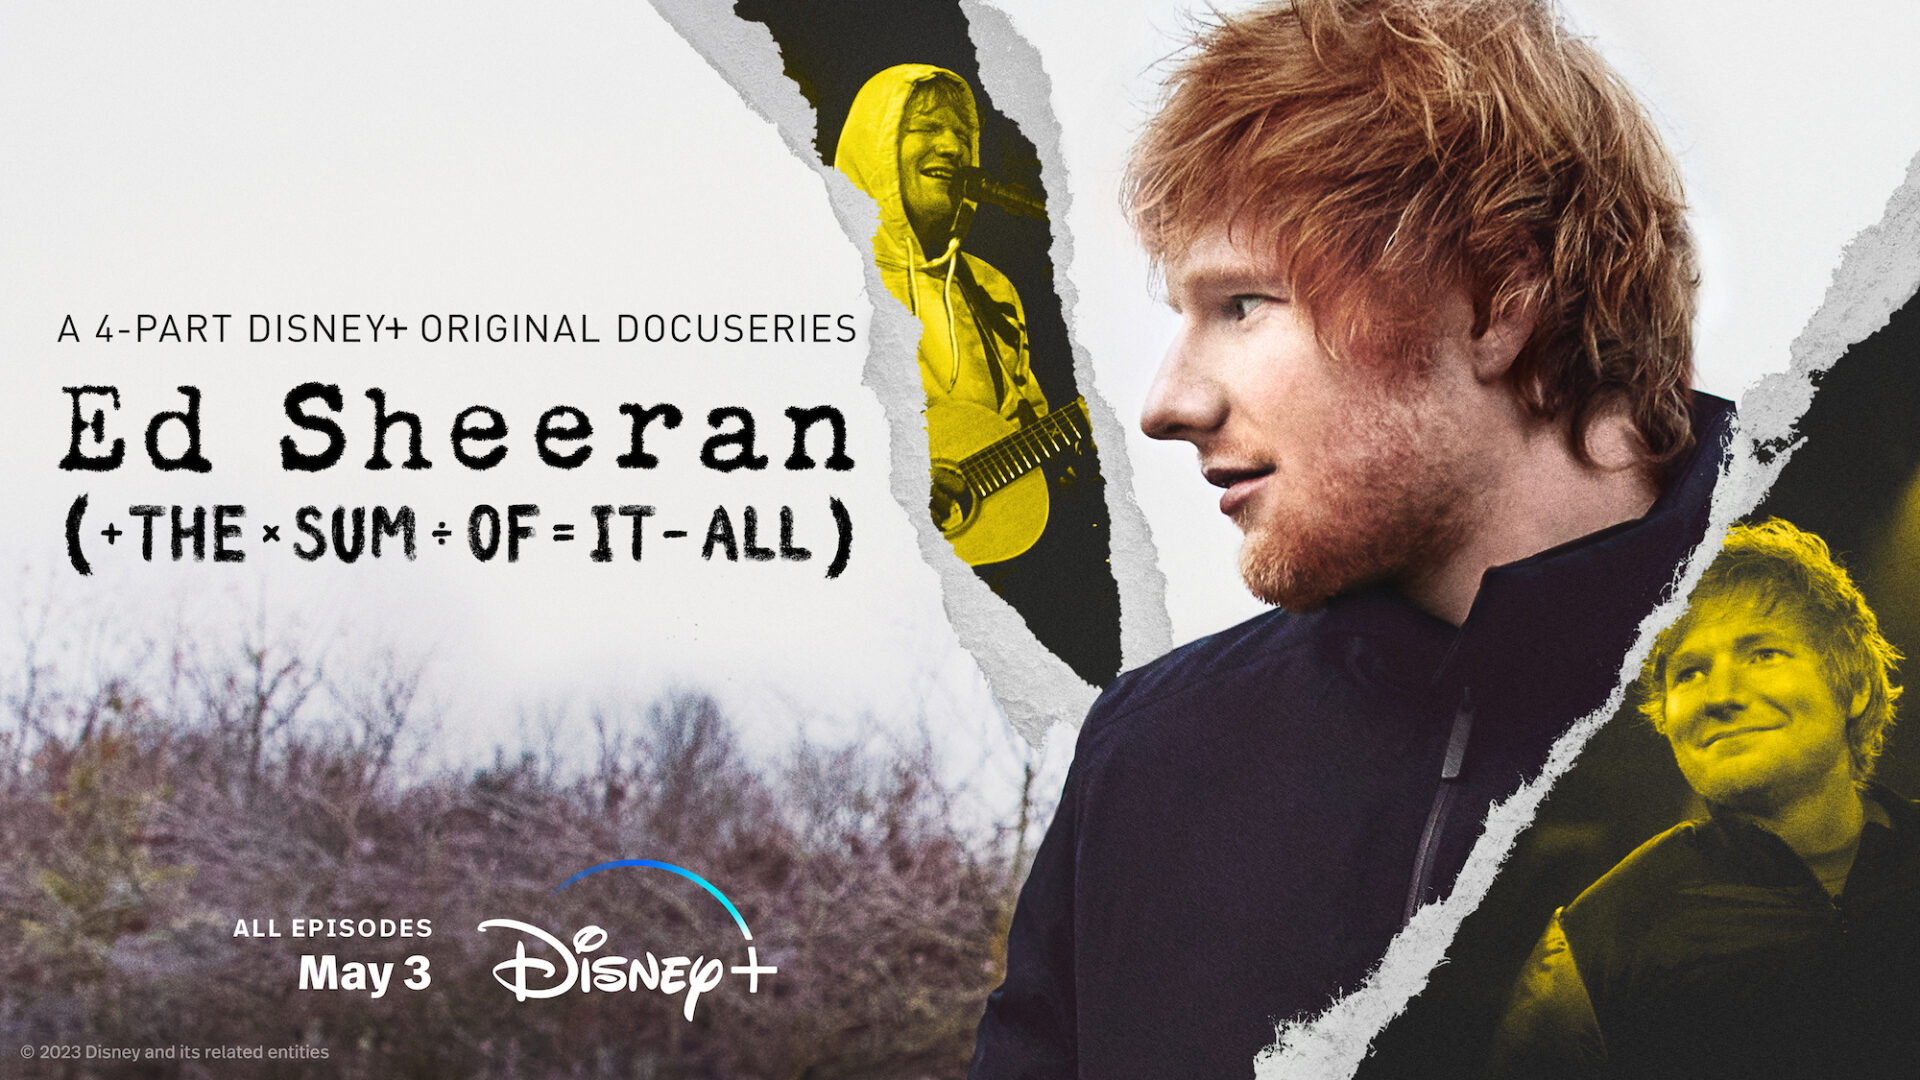 Ed Sheeran The Sum of It All Original Docuseries is streaming on Disney+ this May